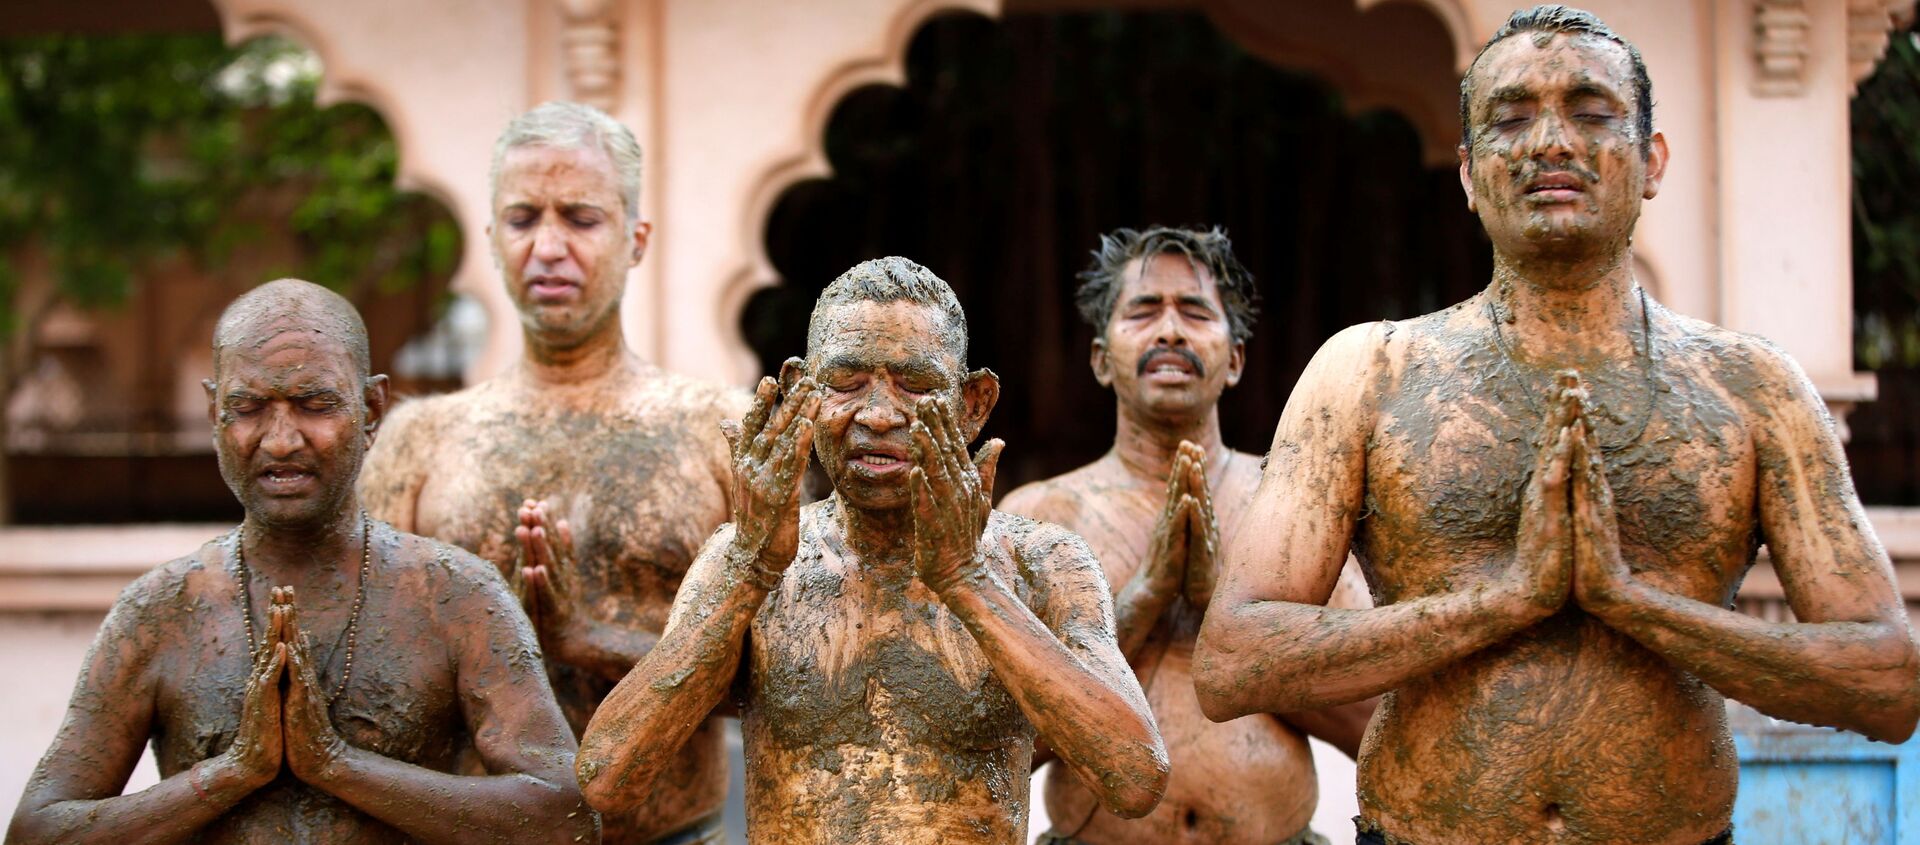 People pray after applying cow dung on their bodies during cow dung therapy, believing it will boost their immunity to defend against the coronavirus disease (COVID-19) at the Shree Swaminarayan Gurukul Vishwavidya Pratishthanam Gaushala or cow shelter on the outskirts of Ahmedabad, India, May 9, 2021 - Sputnik International, 1920